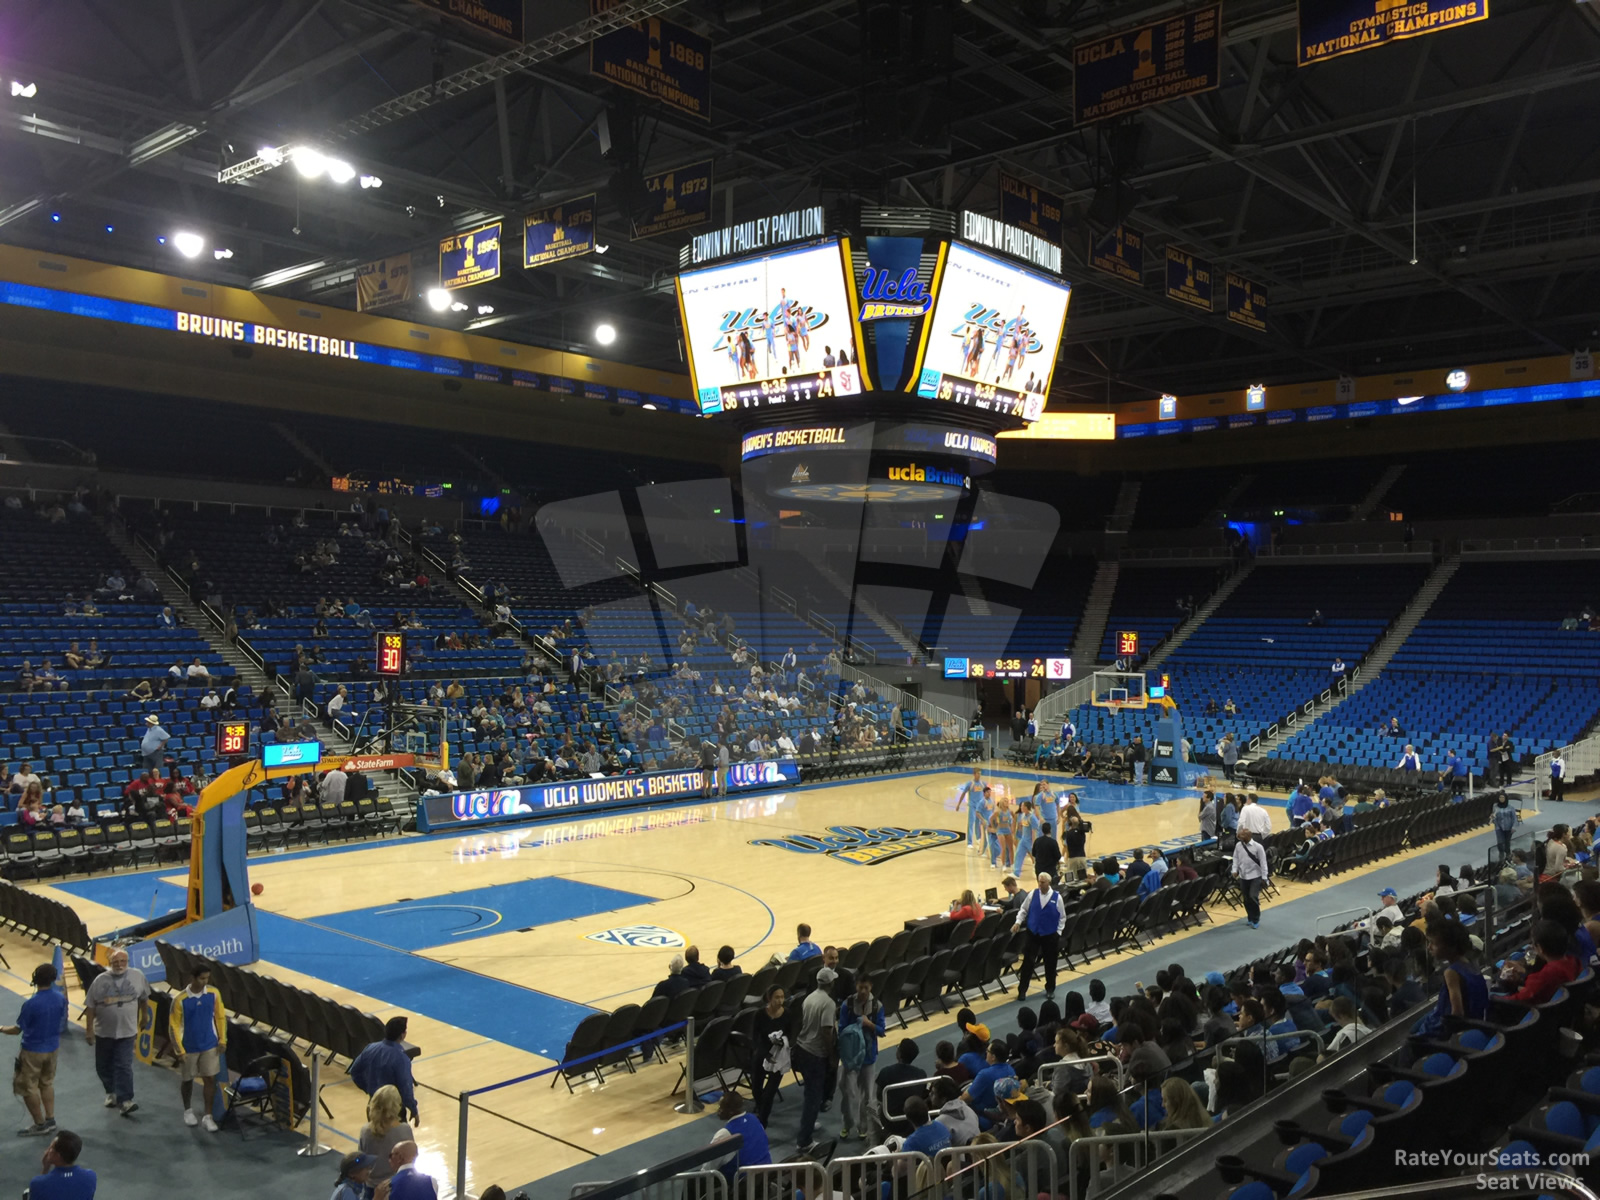 section 118, row 3 seat view  - pauley pavilion